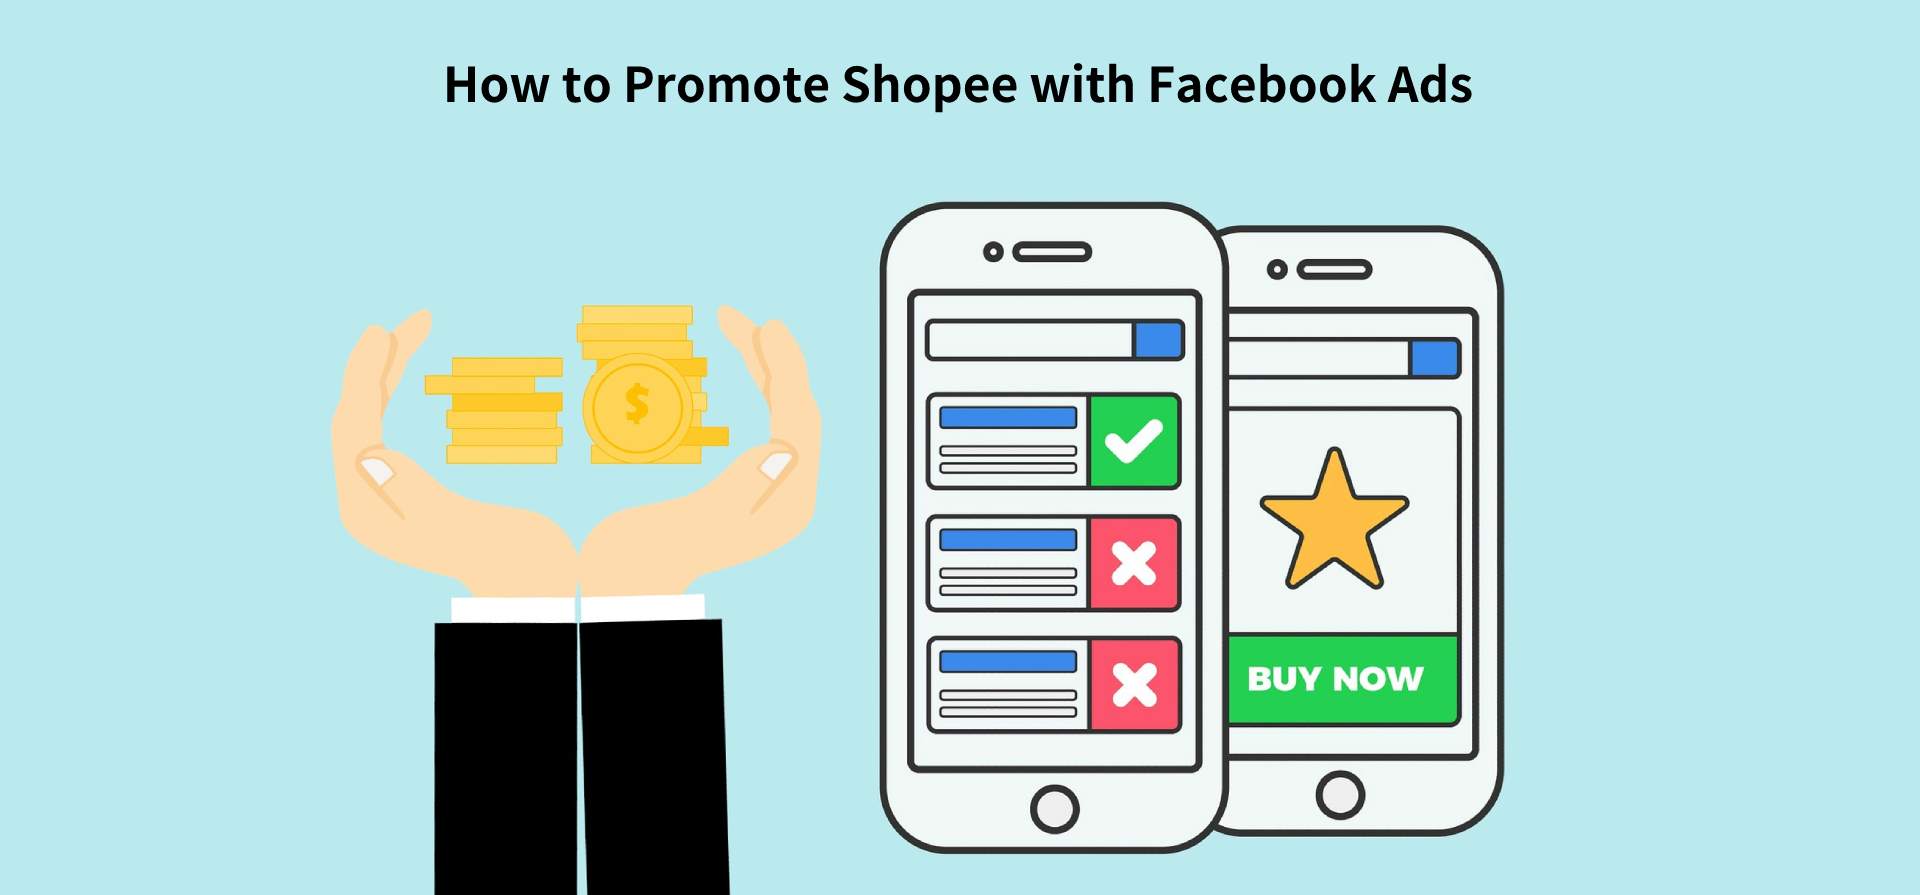 How to Promote Shopee with Facebook Ads?